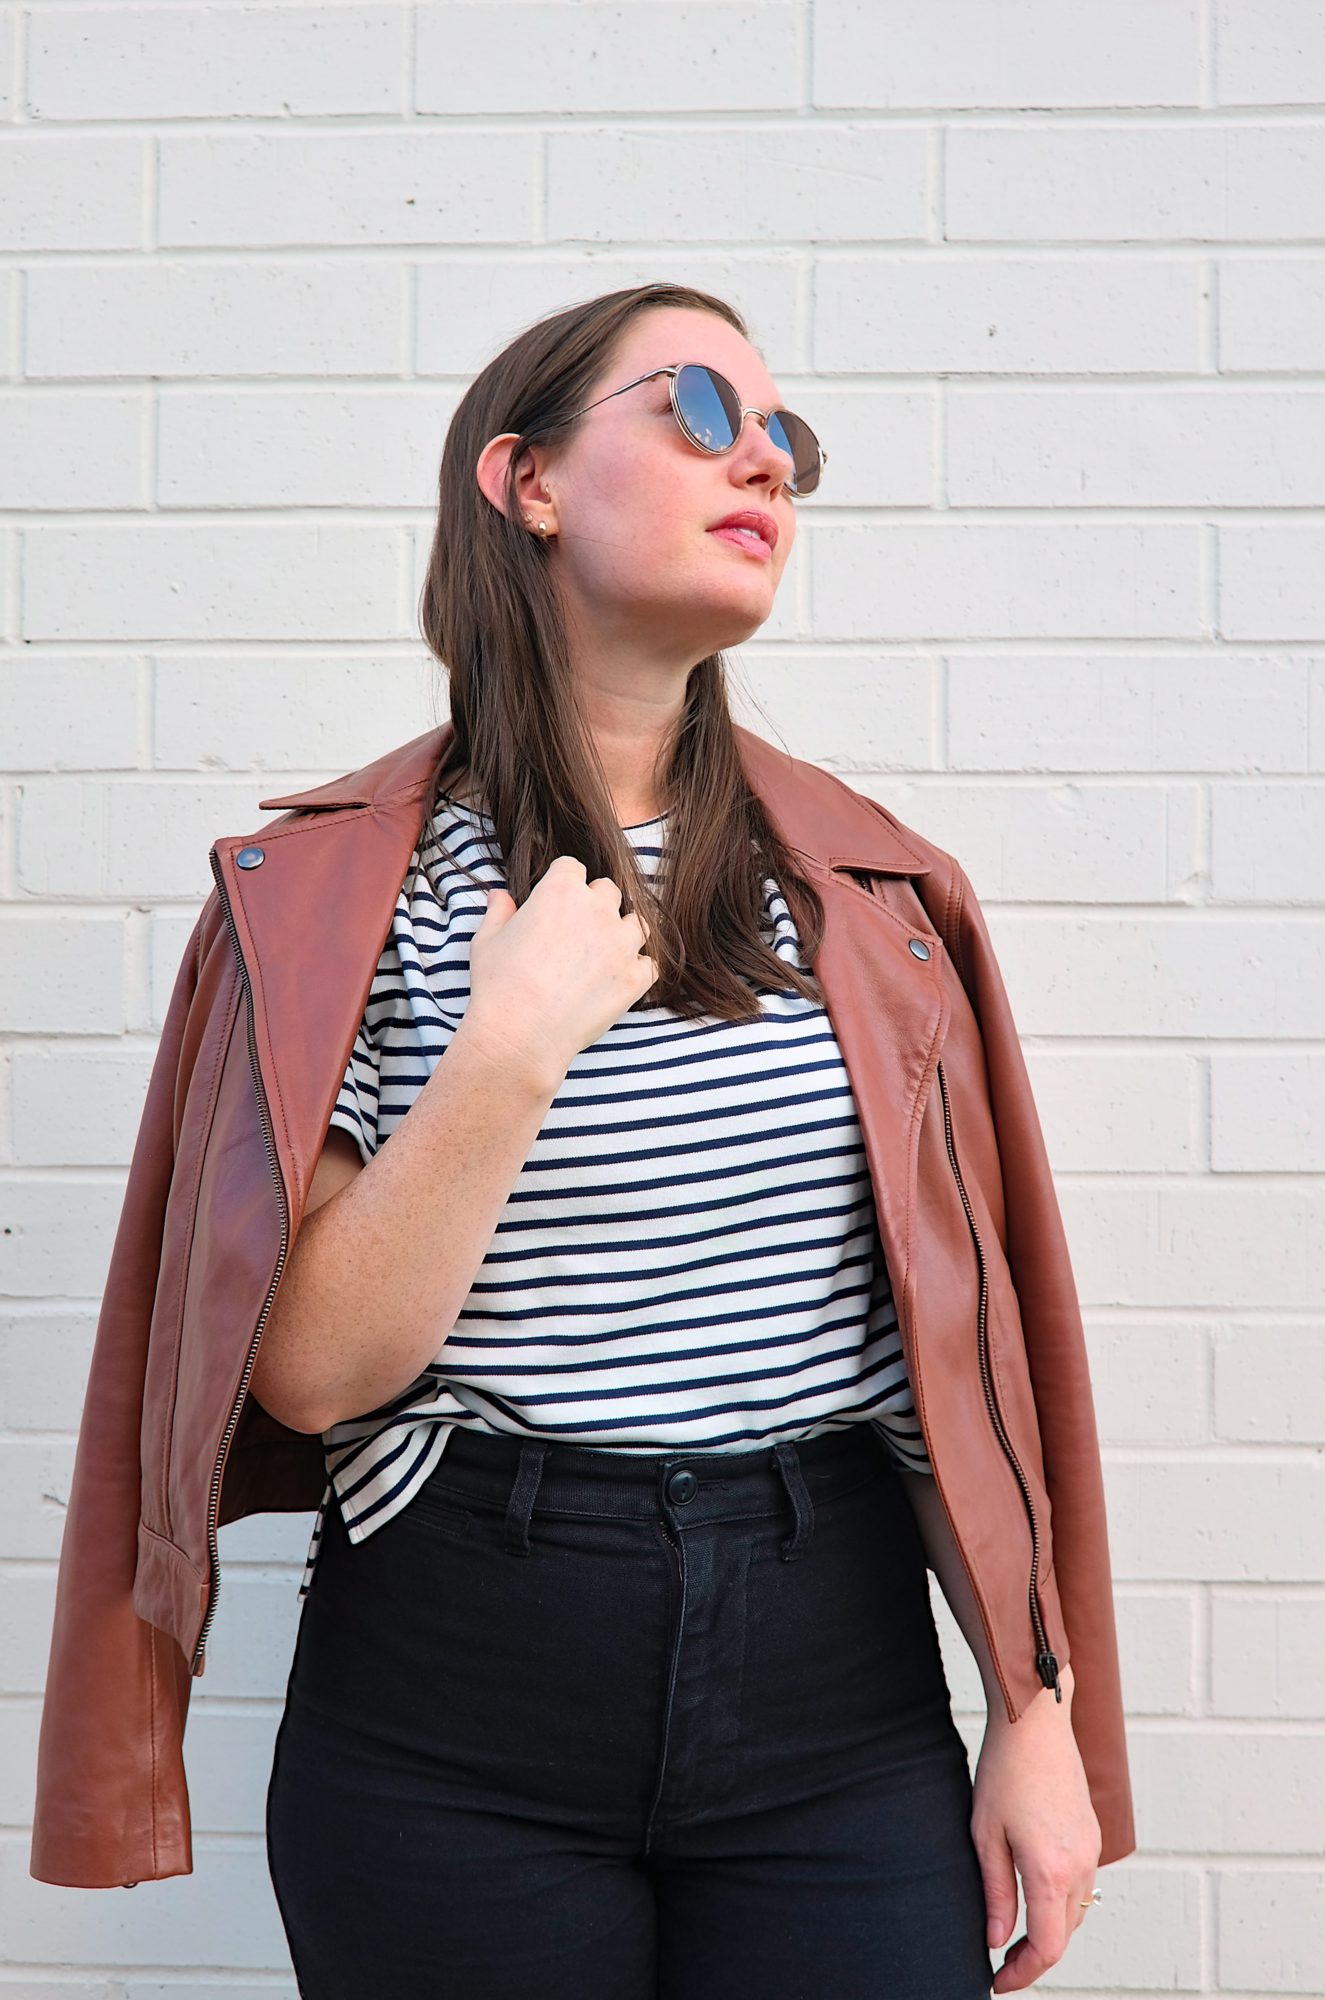 Alyssa wears the Maha Leather Jacket from ABLE with a striped tee; the sky is reflected in her sunglasses